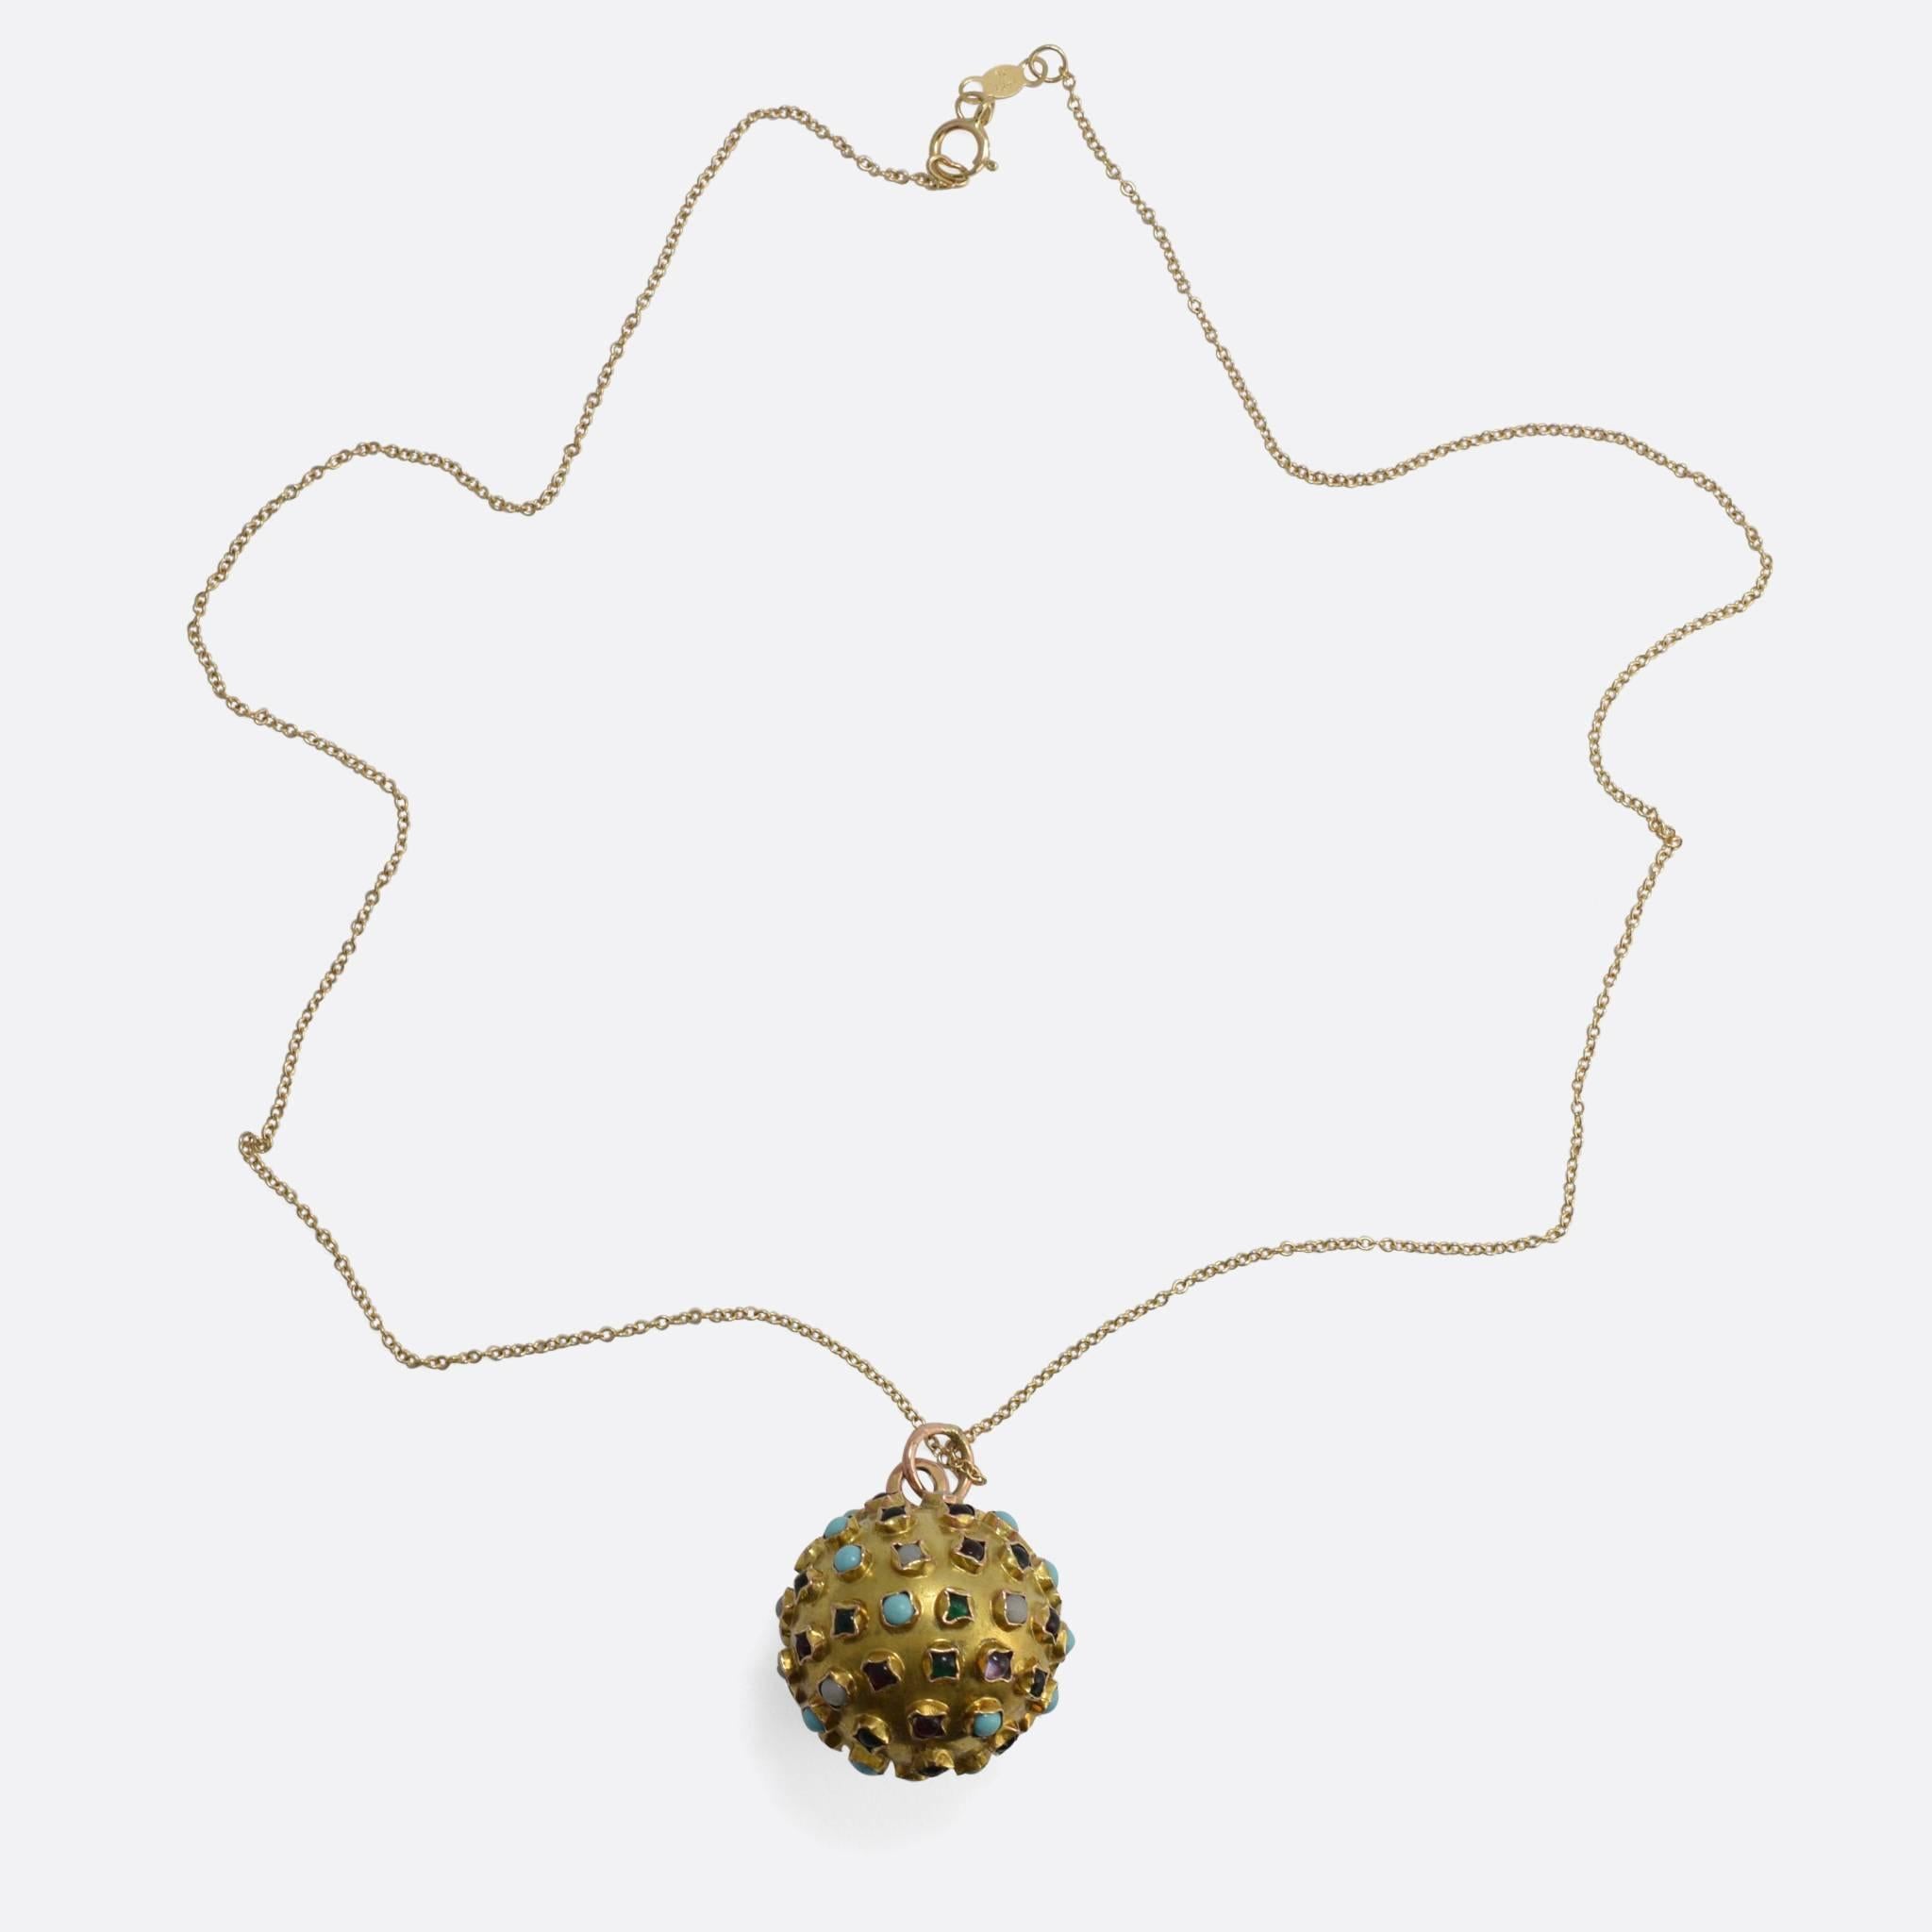 This striking orb pendant dates to the 1960s, and holds a strong Space Race vibe. It's modelled in 18k gold and set with a variety of coloured gemstones, including: ruby, emerald, amethyst, garnet, turquoise and opal. It's a good large size, and